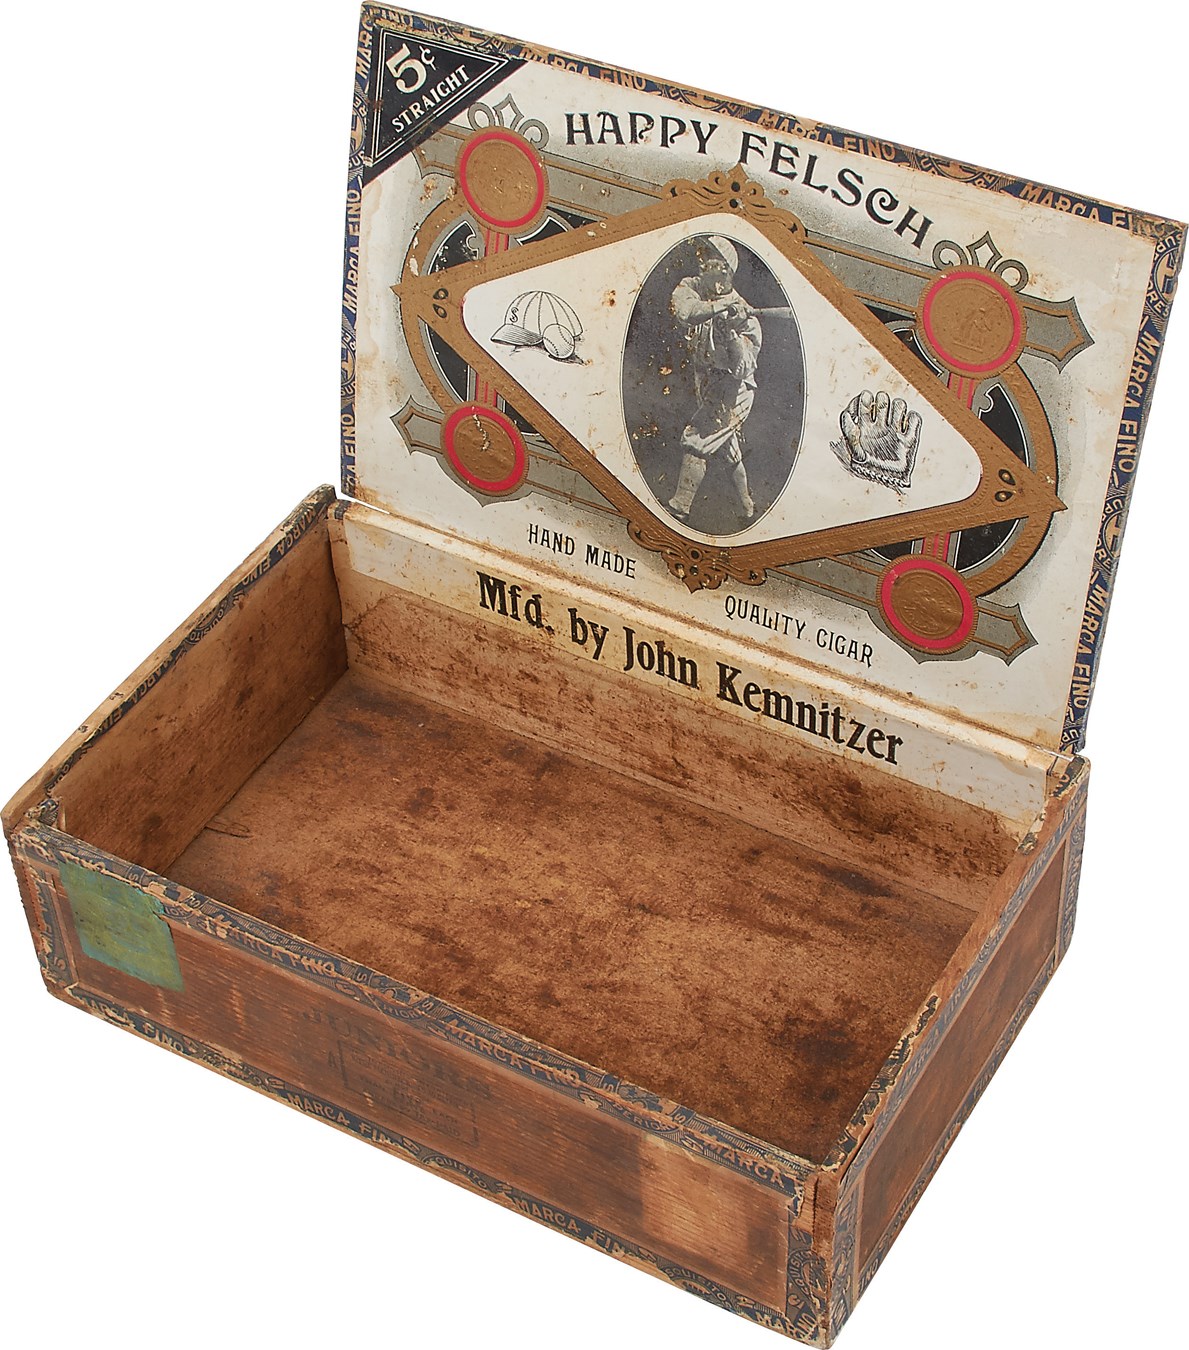 - Happy Felsch 1917 World Champion Chicago White Sox Baseball Cigar Box - Only One Known